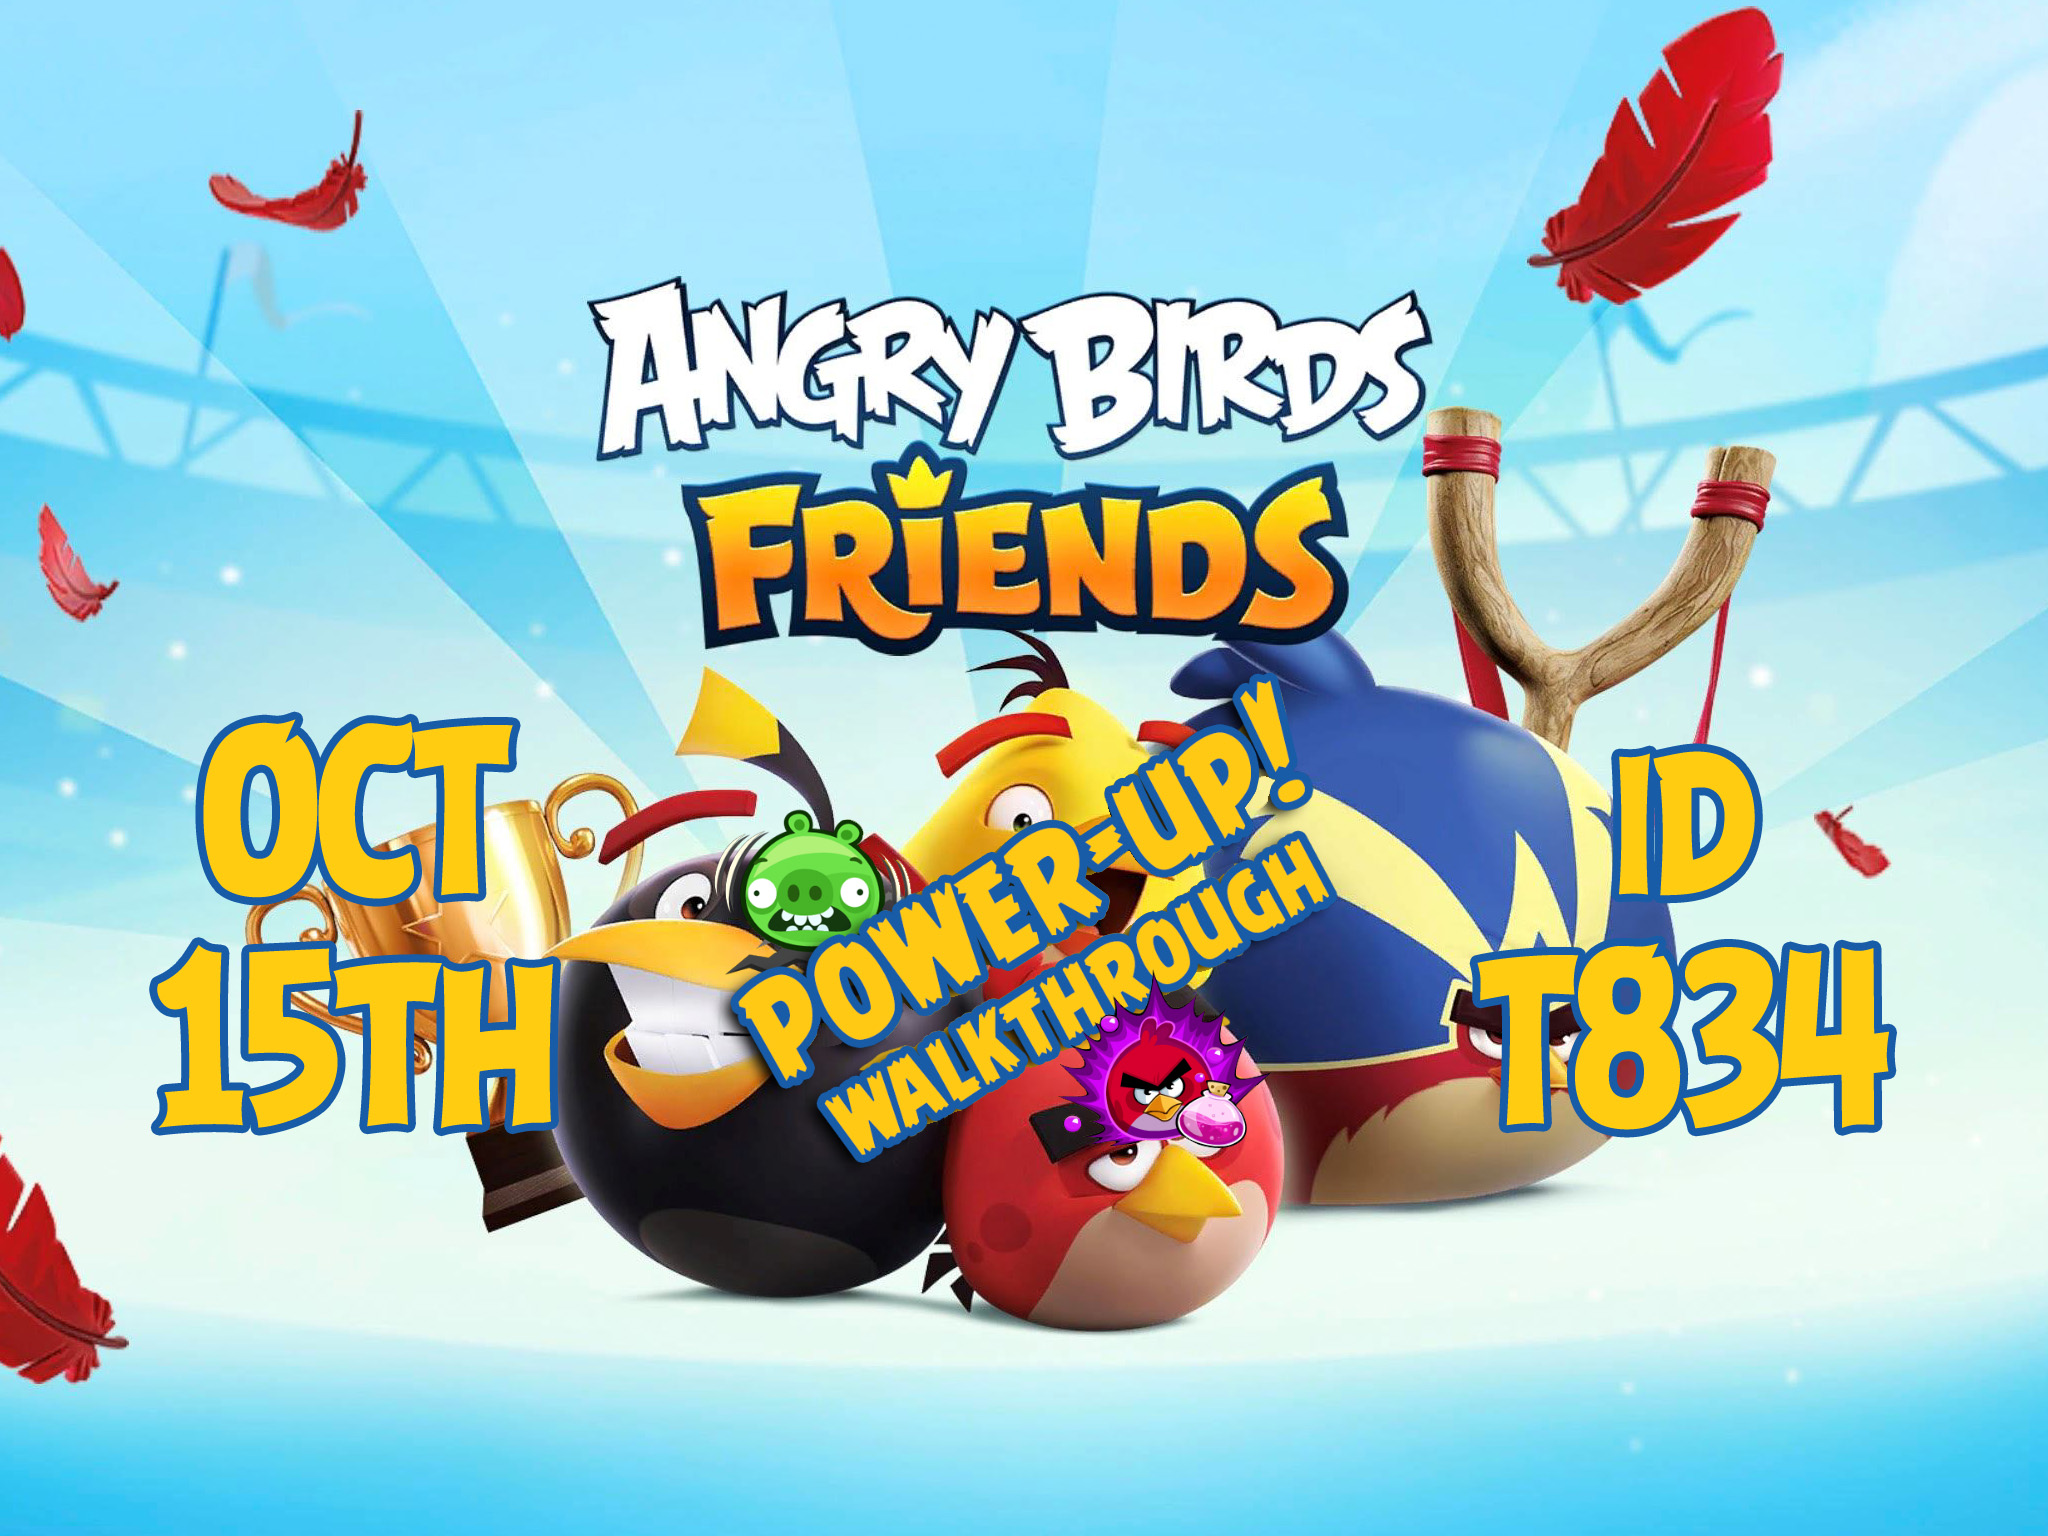 Angry-Birds-Friends-Tournament-T834-Feature-Image-PU